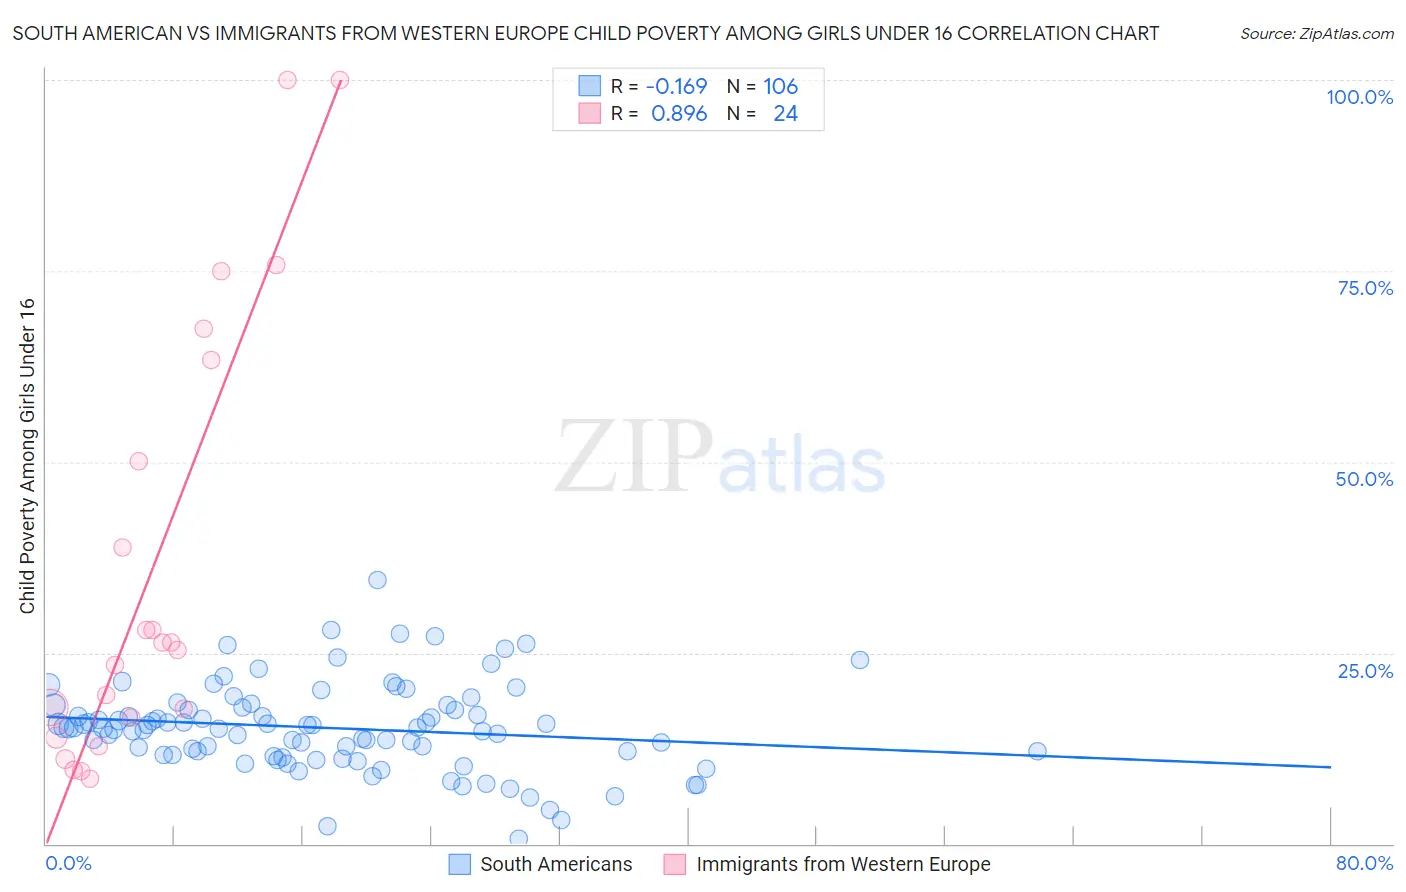 South American vs Immigrants from Western Europe Child Poverty Among Girls Under 16